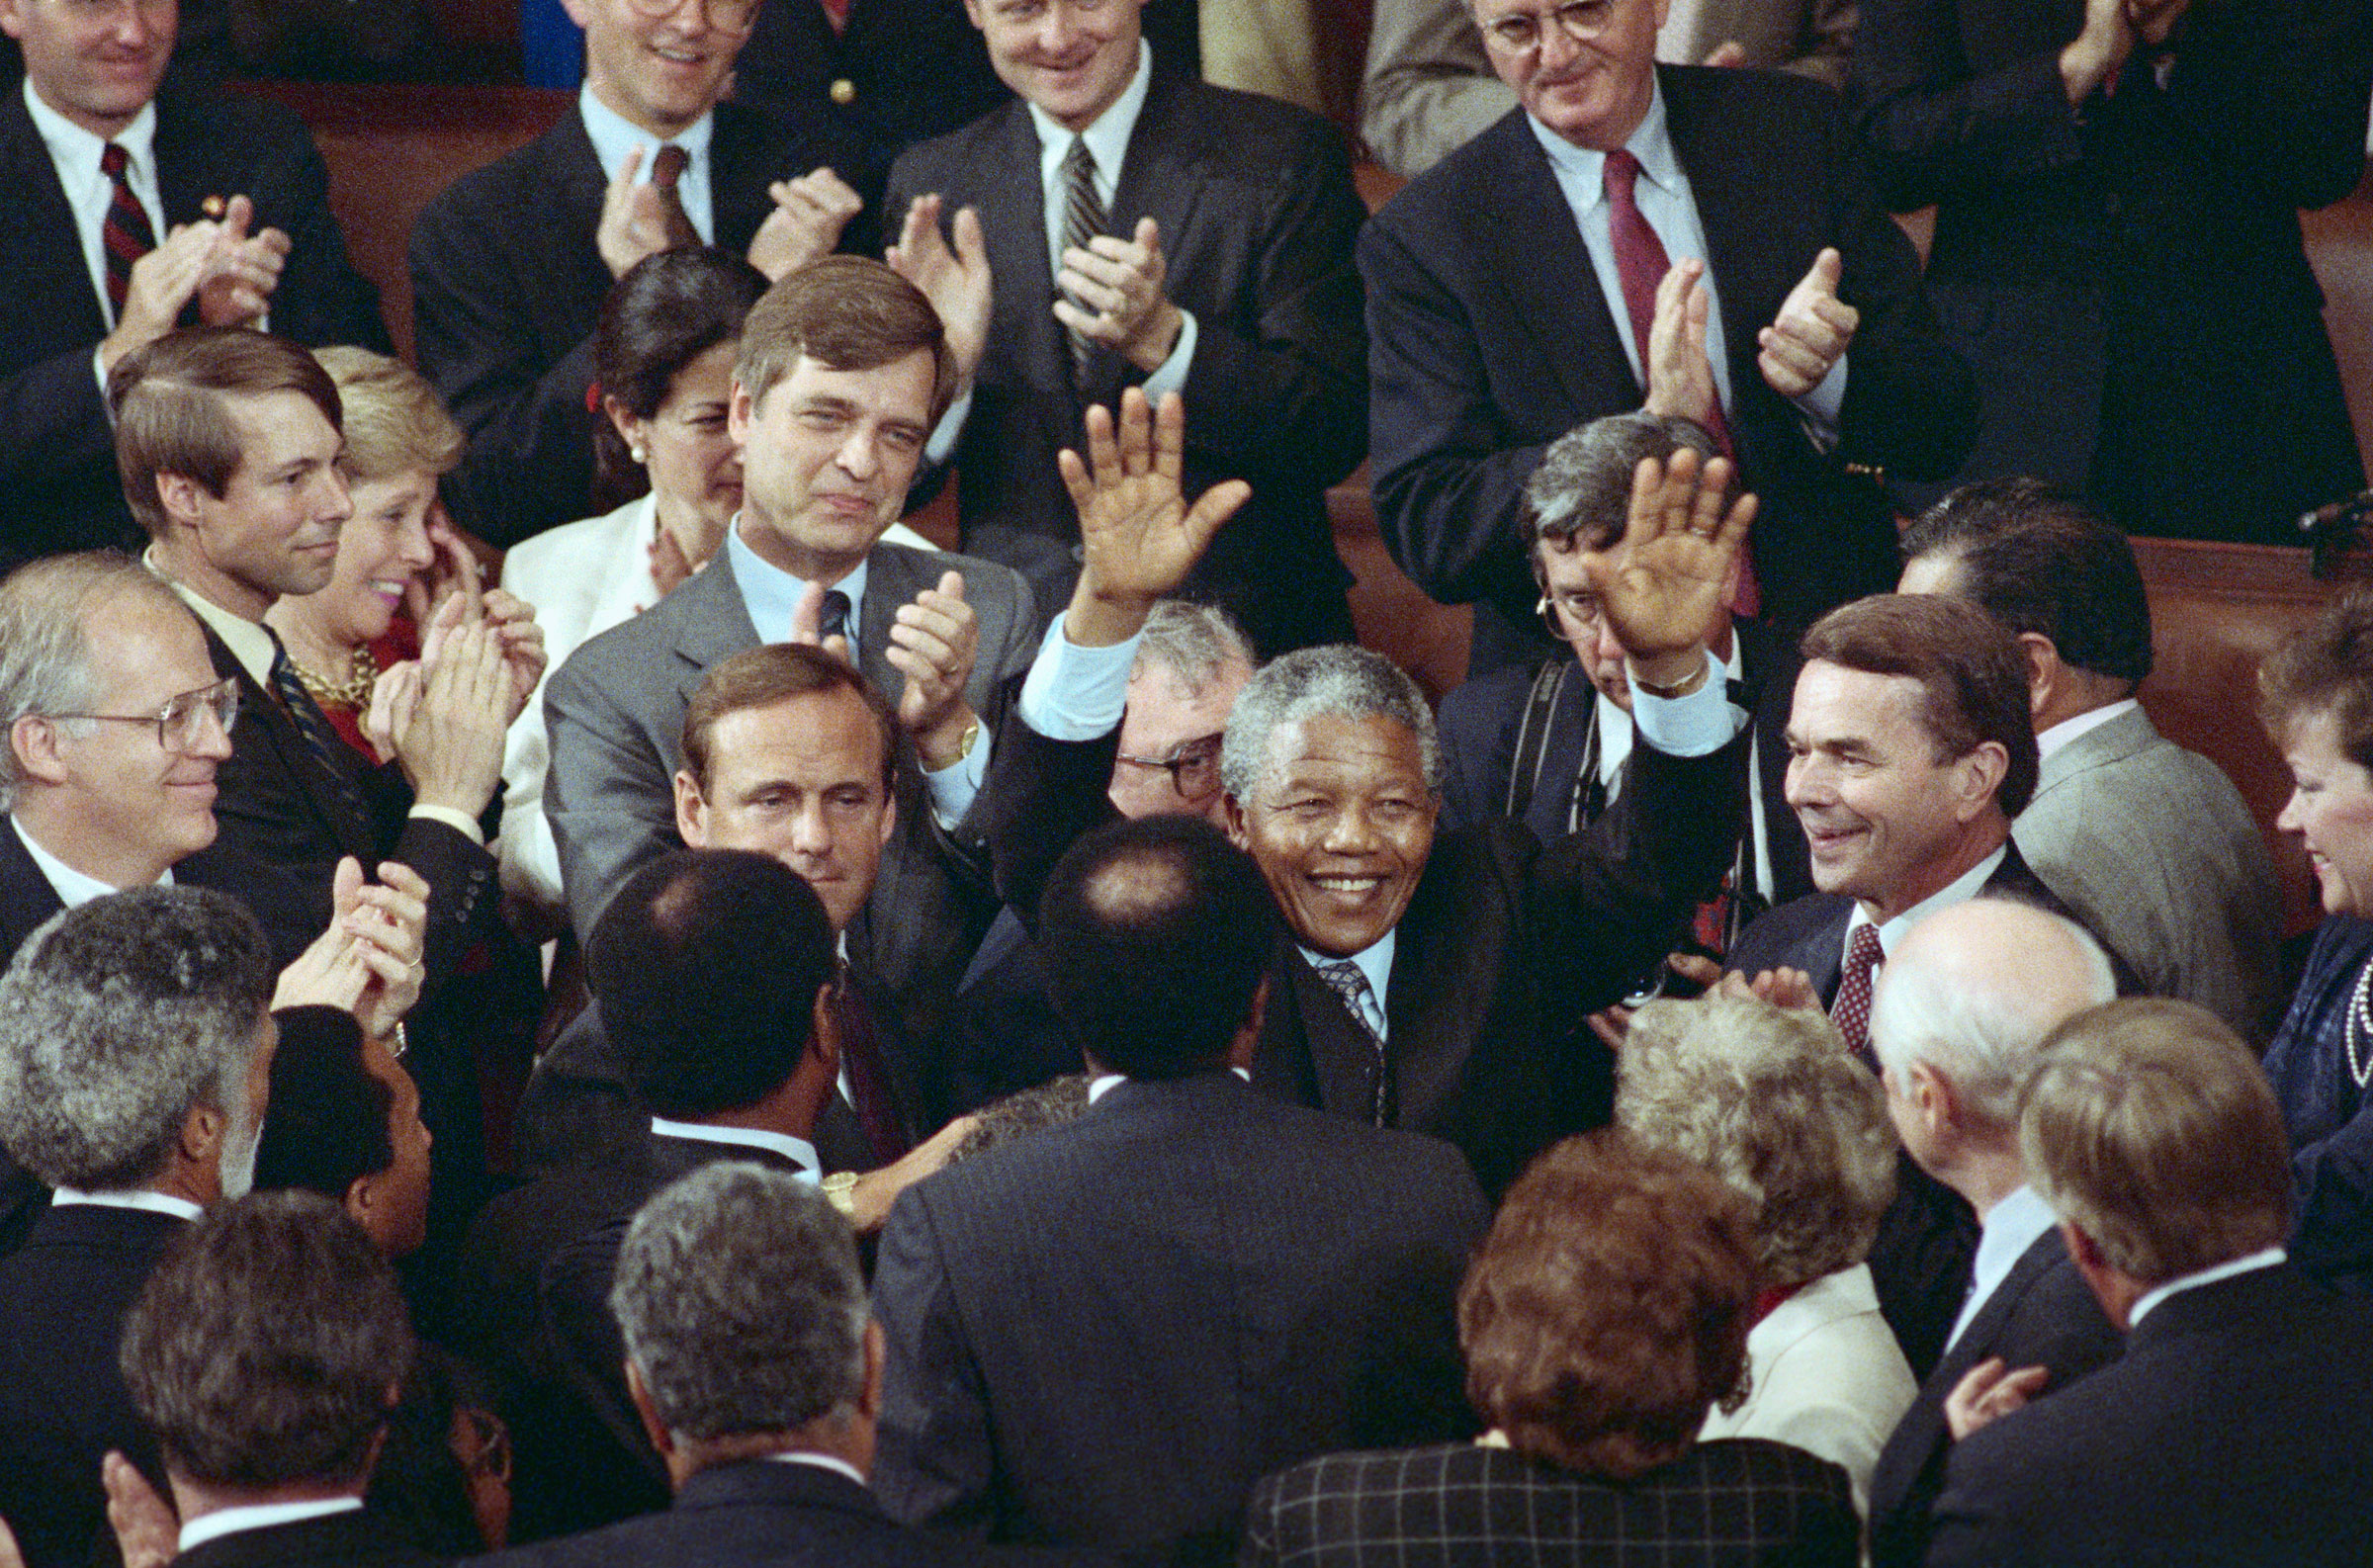 ANC leader Nelson Mandela raises his hands in response to a bipartisan standing ovation at the completion of his address to a joint meeting of Congress. (Bettmann Archive/Getty Images)